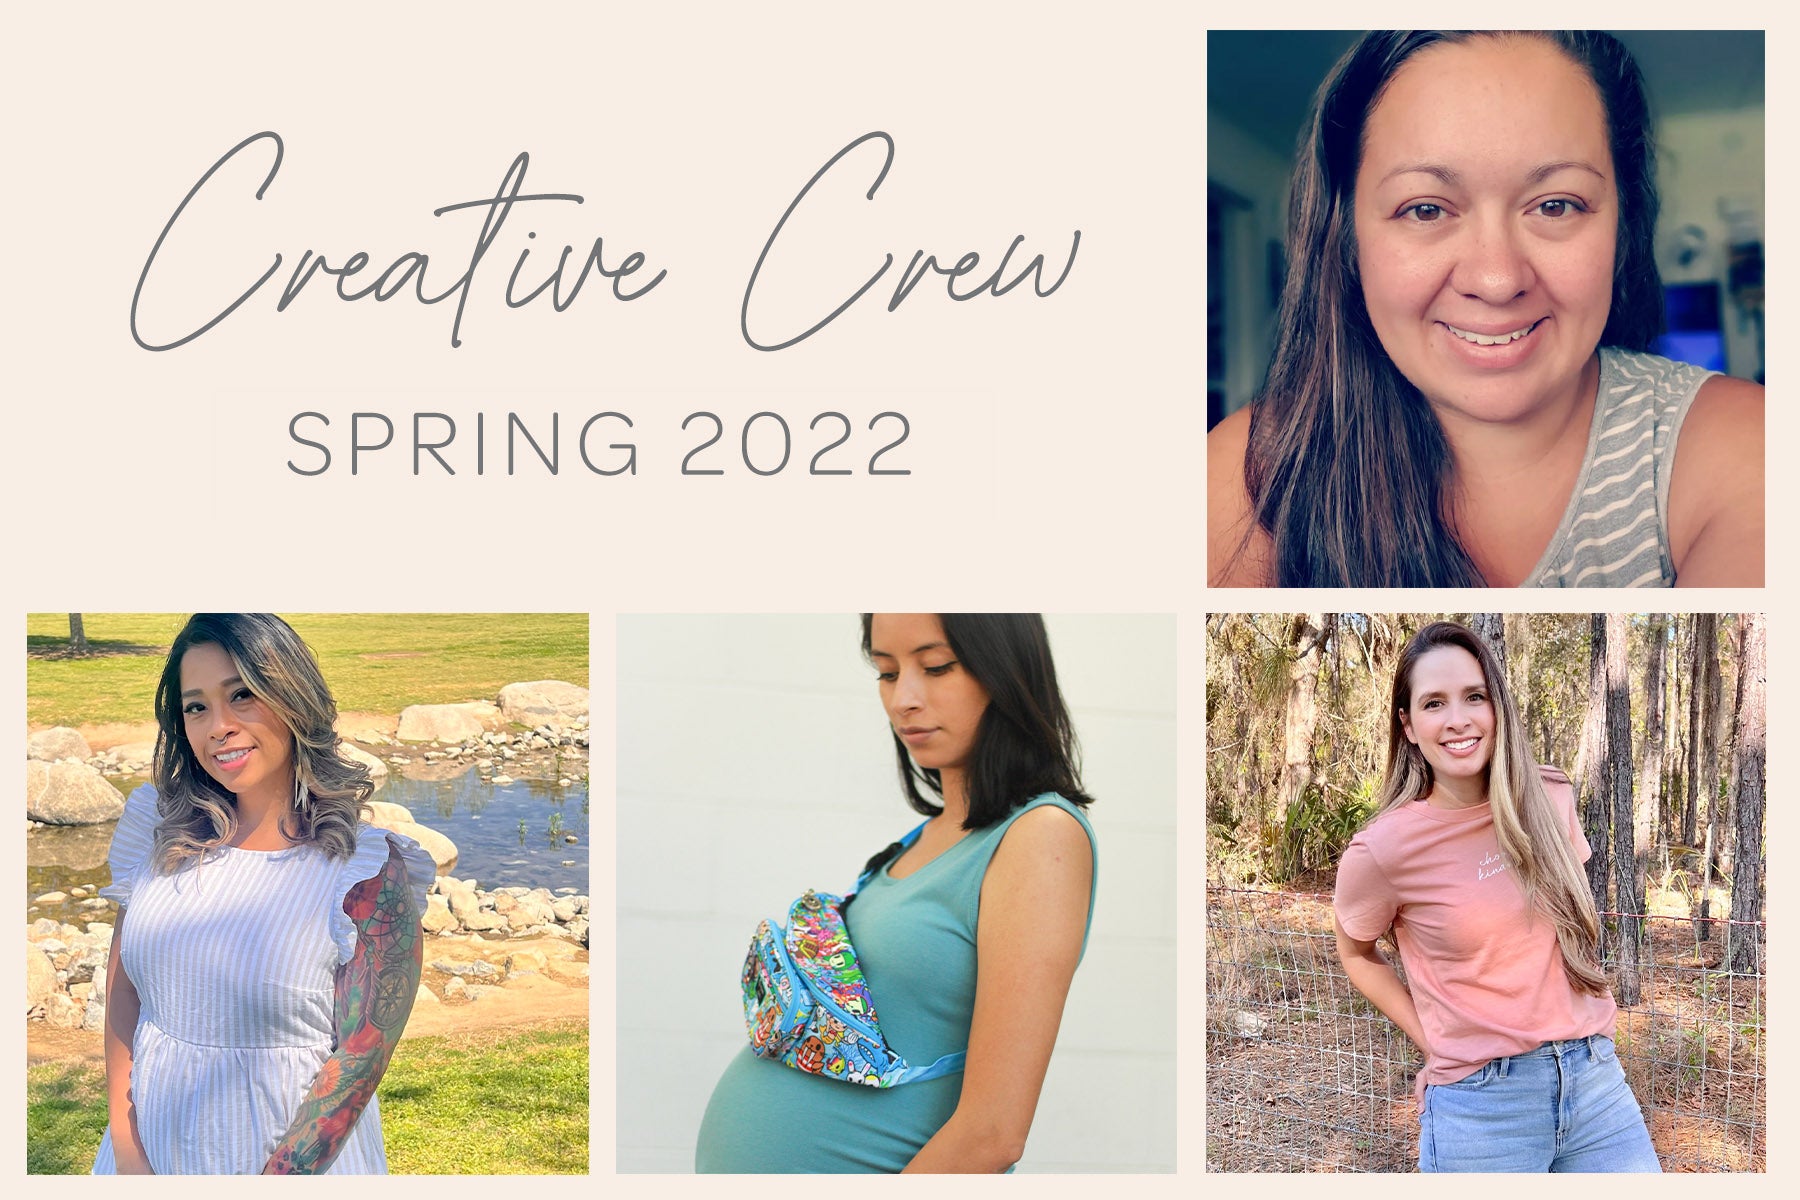 NEW CREATIVE CREW in the house!